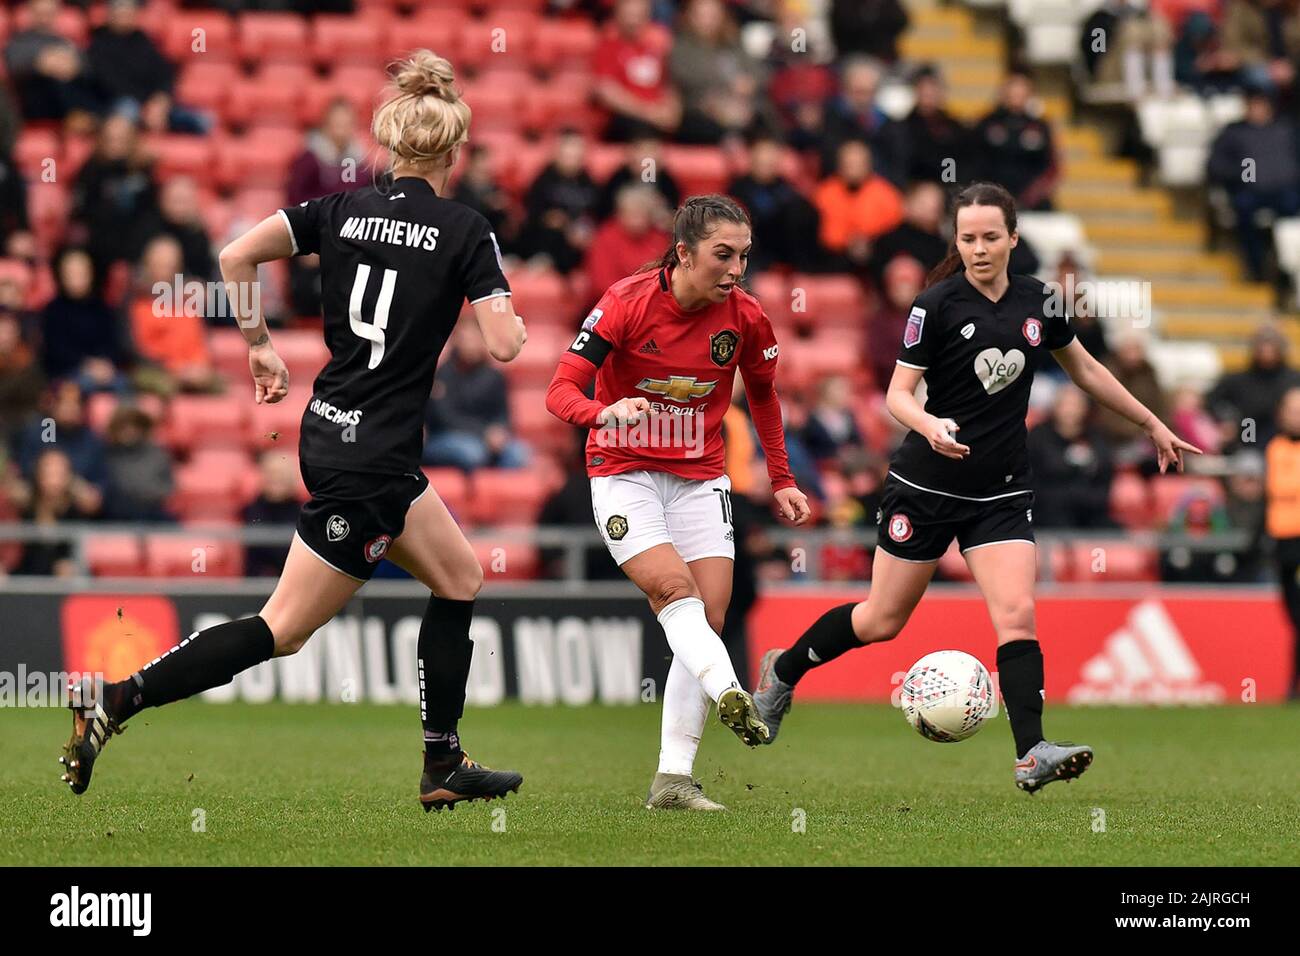 Leigh, UK. 05th Jan, 2020. LEIGH, ENGLAND - JANUARY 5TH Katie Zelem (captain) of Manchester United Women, Jasmine Matthews of Bristol City Women and Olivia Chance of Bristol City Women during the Barclays FA Women's Super League match between Manchester United and Bristol City at Leigh Sport Stadium, Leigh on Sunday 5th January 2020. (Credit: Eddie Garvey | MI News) Photograph may only be used for newspaper and/or magazine editorial purposes, license required for commercial use Credit: MI News & Sport /Alamy Live News Stock Photo